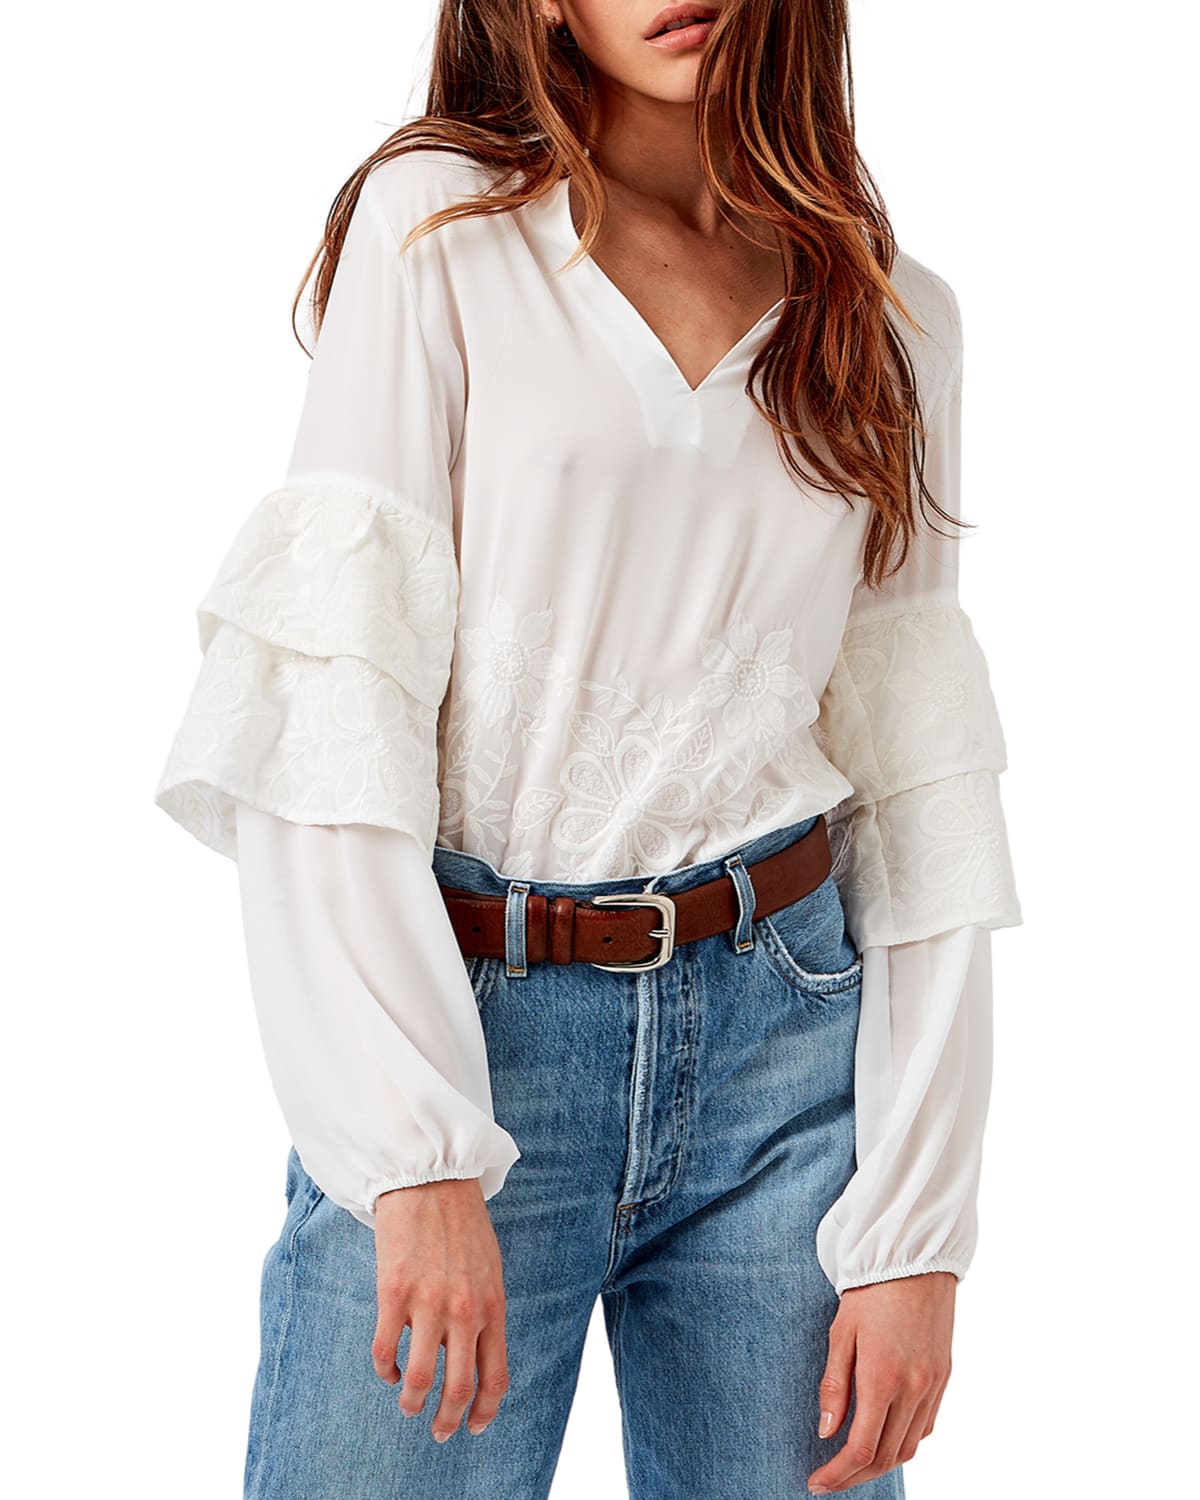 Women's Long Sleeve Blouse Embroidered Rose Tassel Organza Patchwork Top Shirt